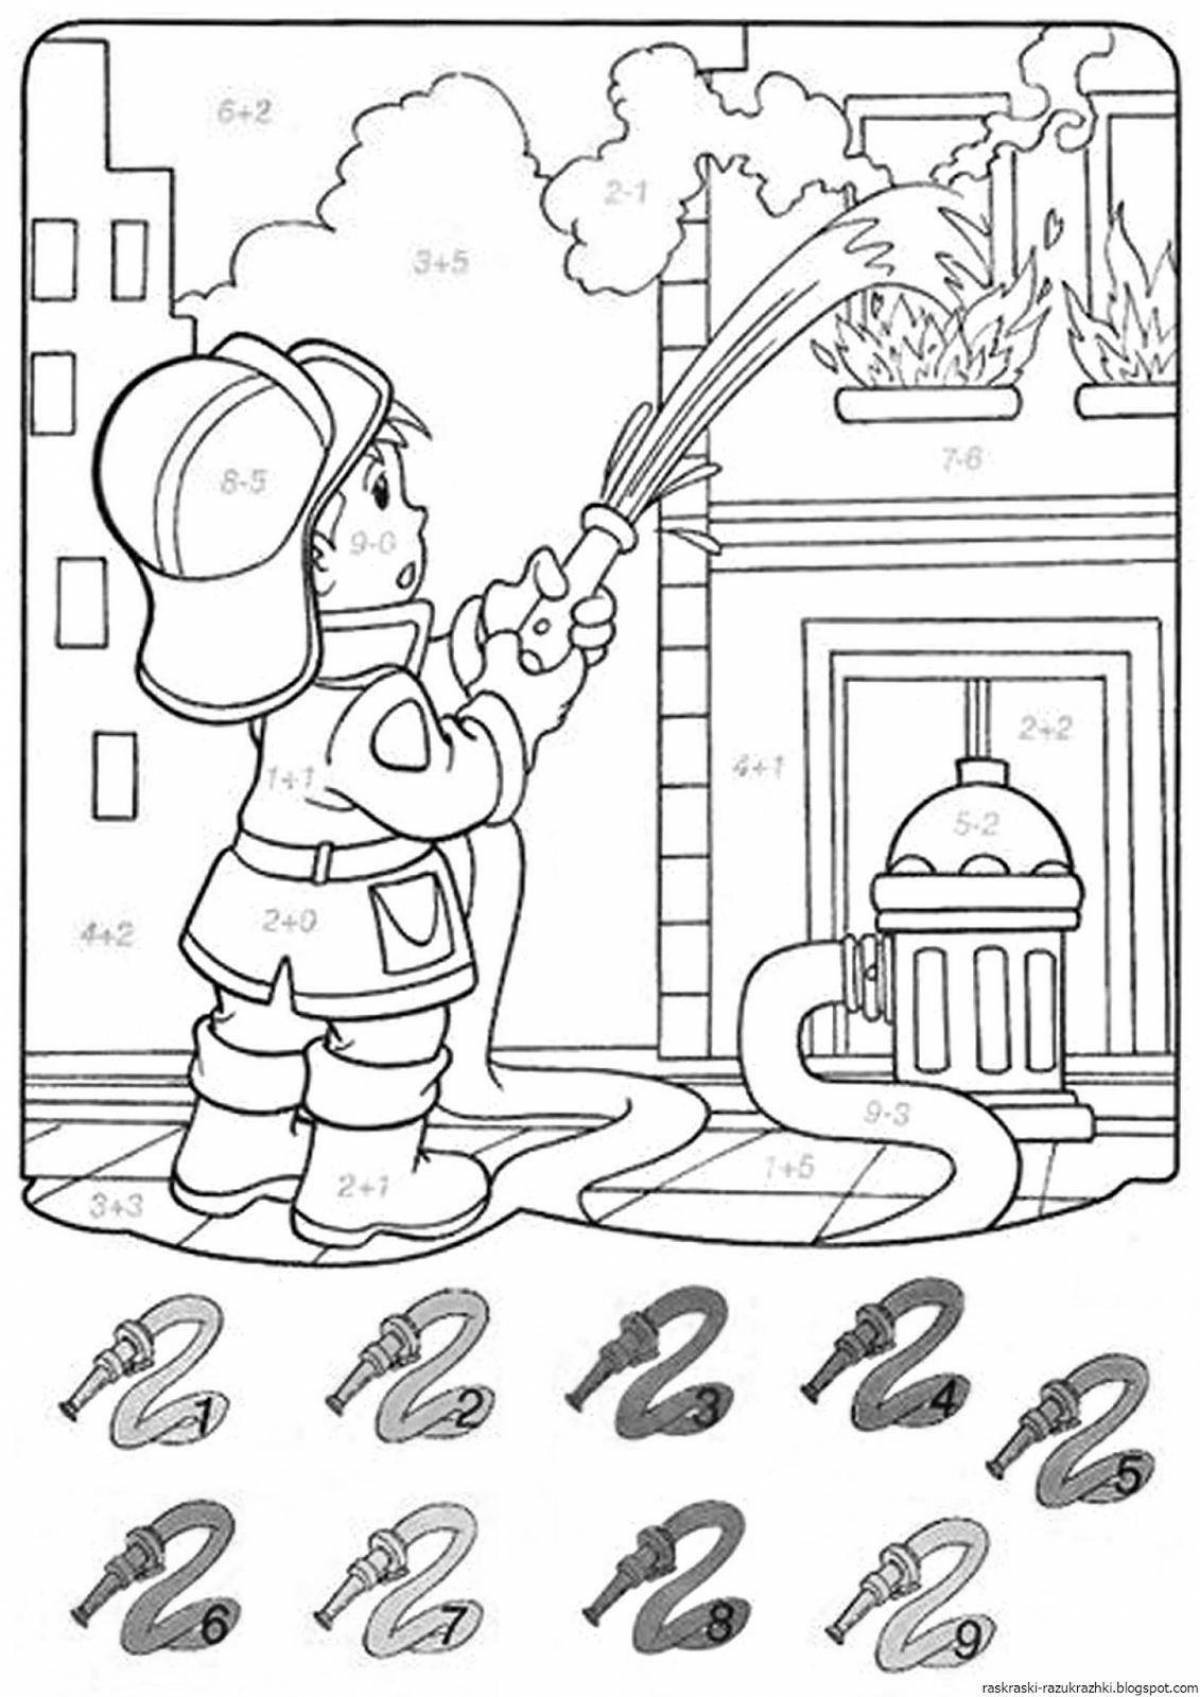 Radiant fire safety coloring page for kindergarten